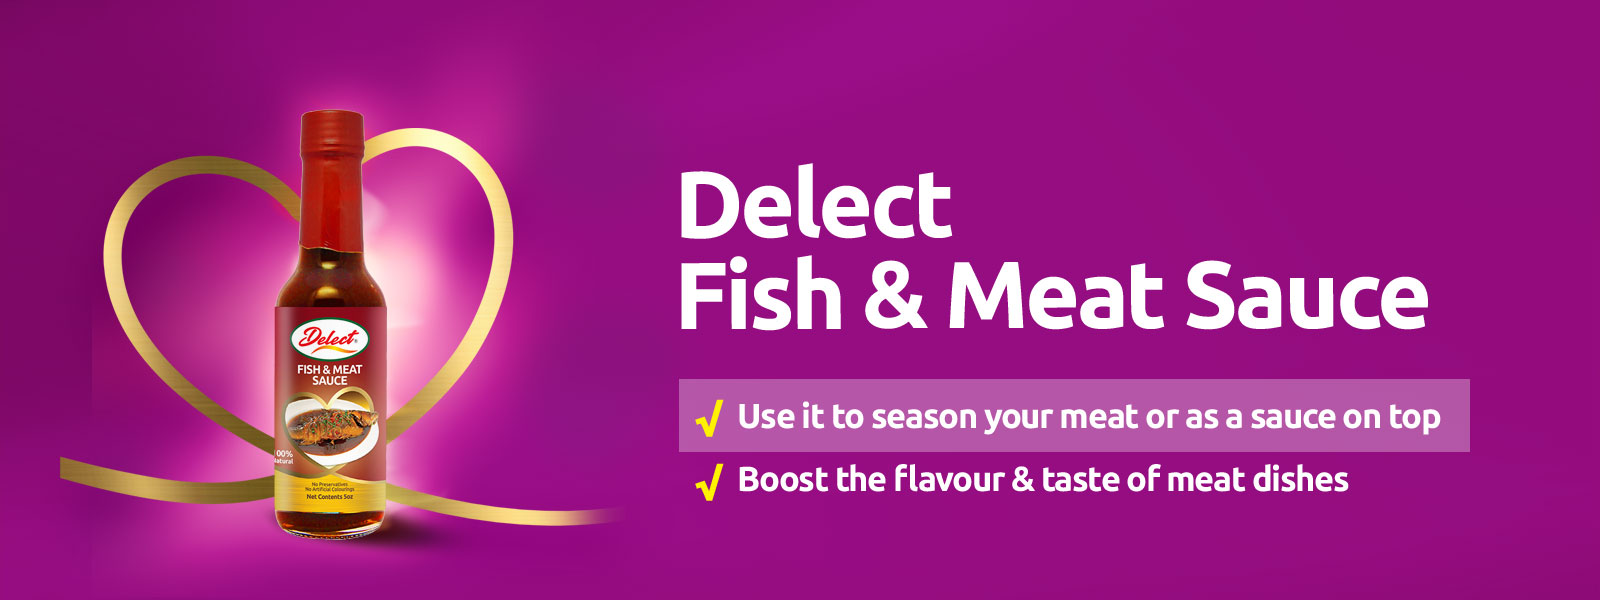 delect_fish_meat_sauce_banner